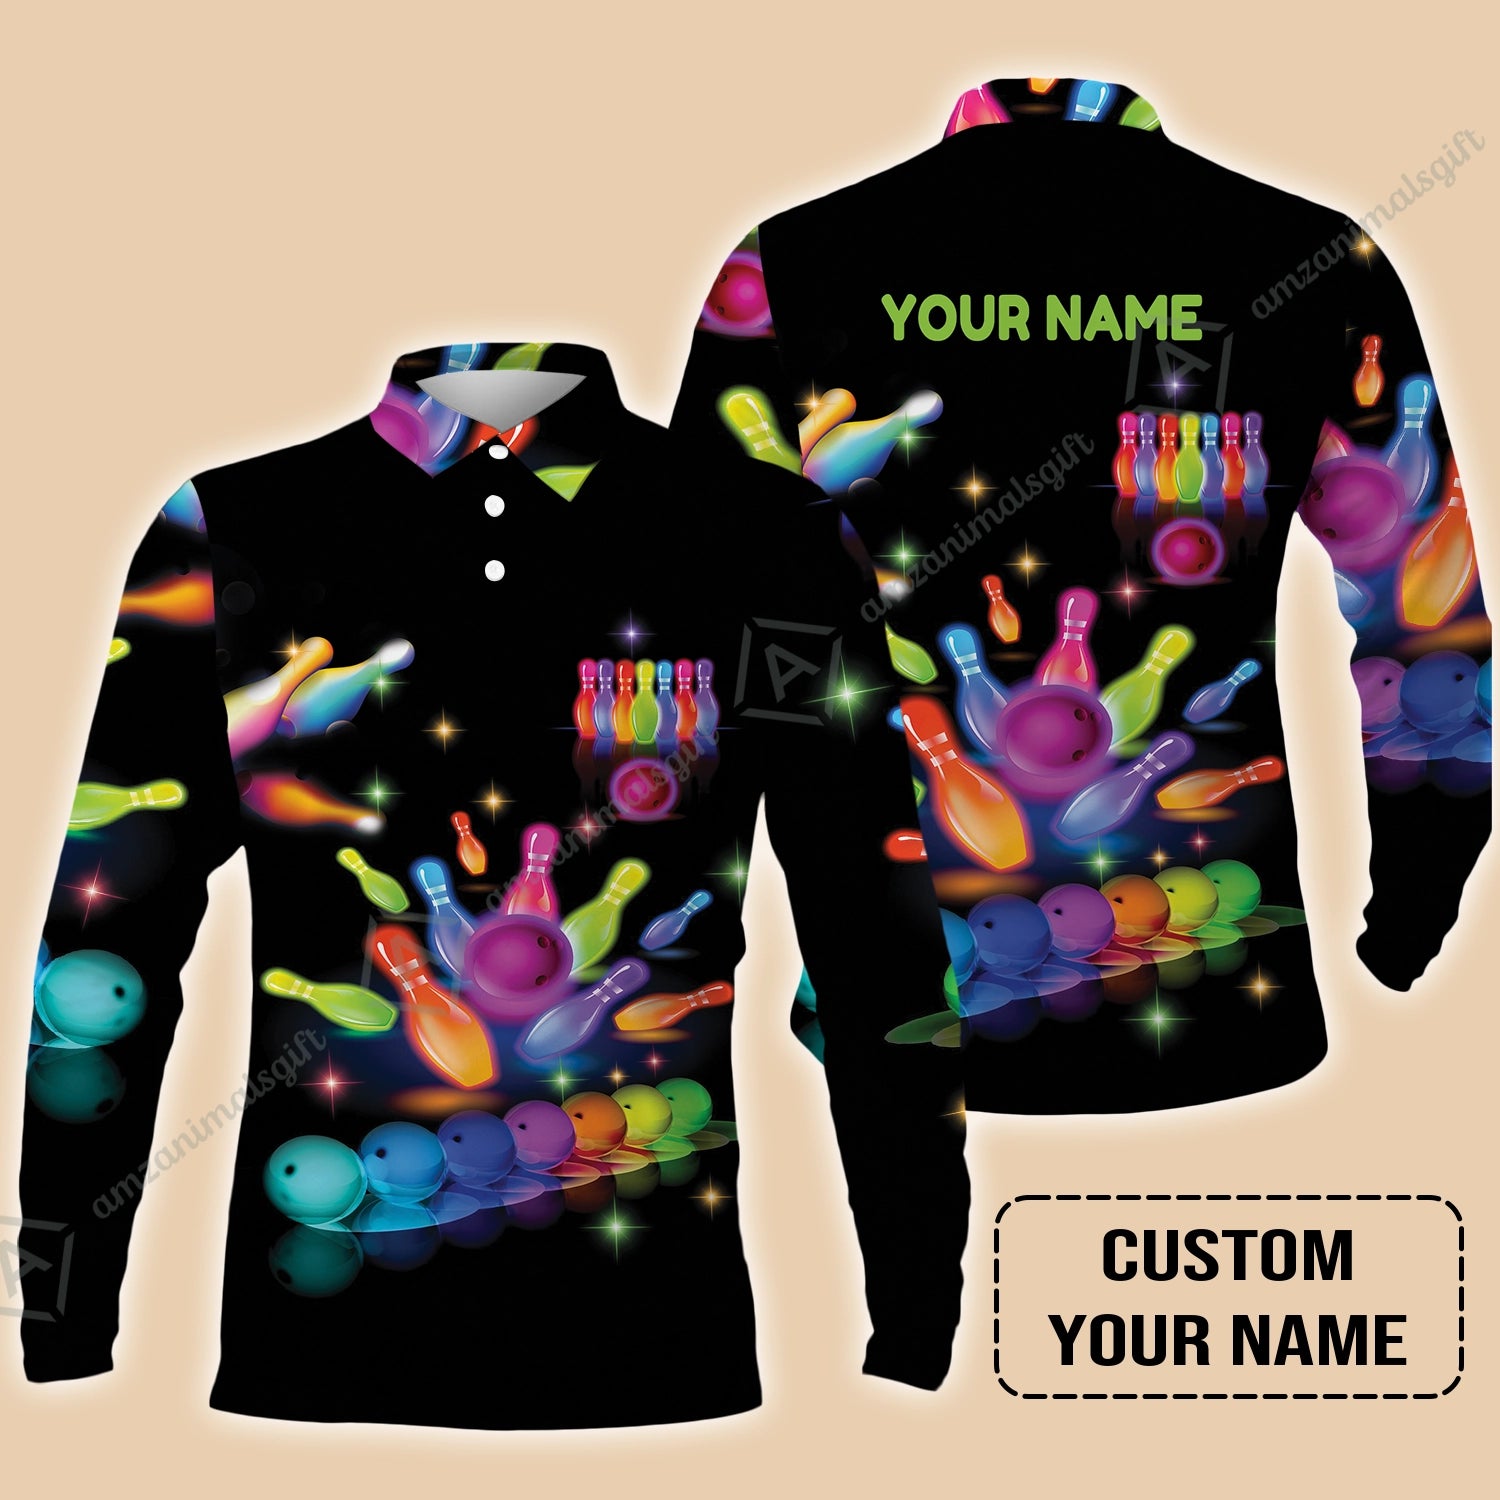 Bowling Long Polo Shirt With Custom Name, Colorful Bowling Pattern Polo Shirt For Men And Women, Perfect Outfits For Bowling Lovers, Bowlers